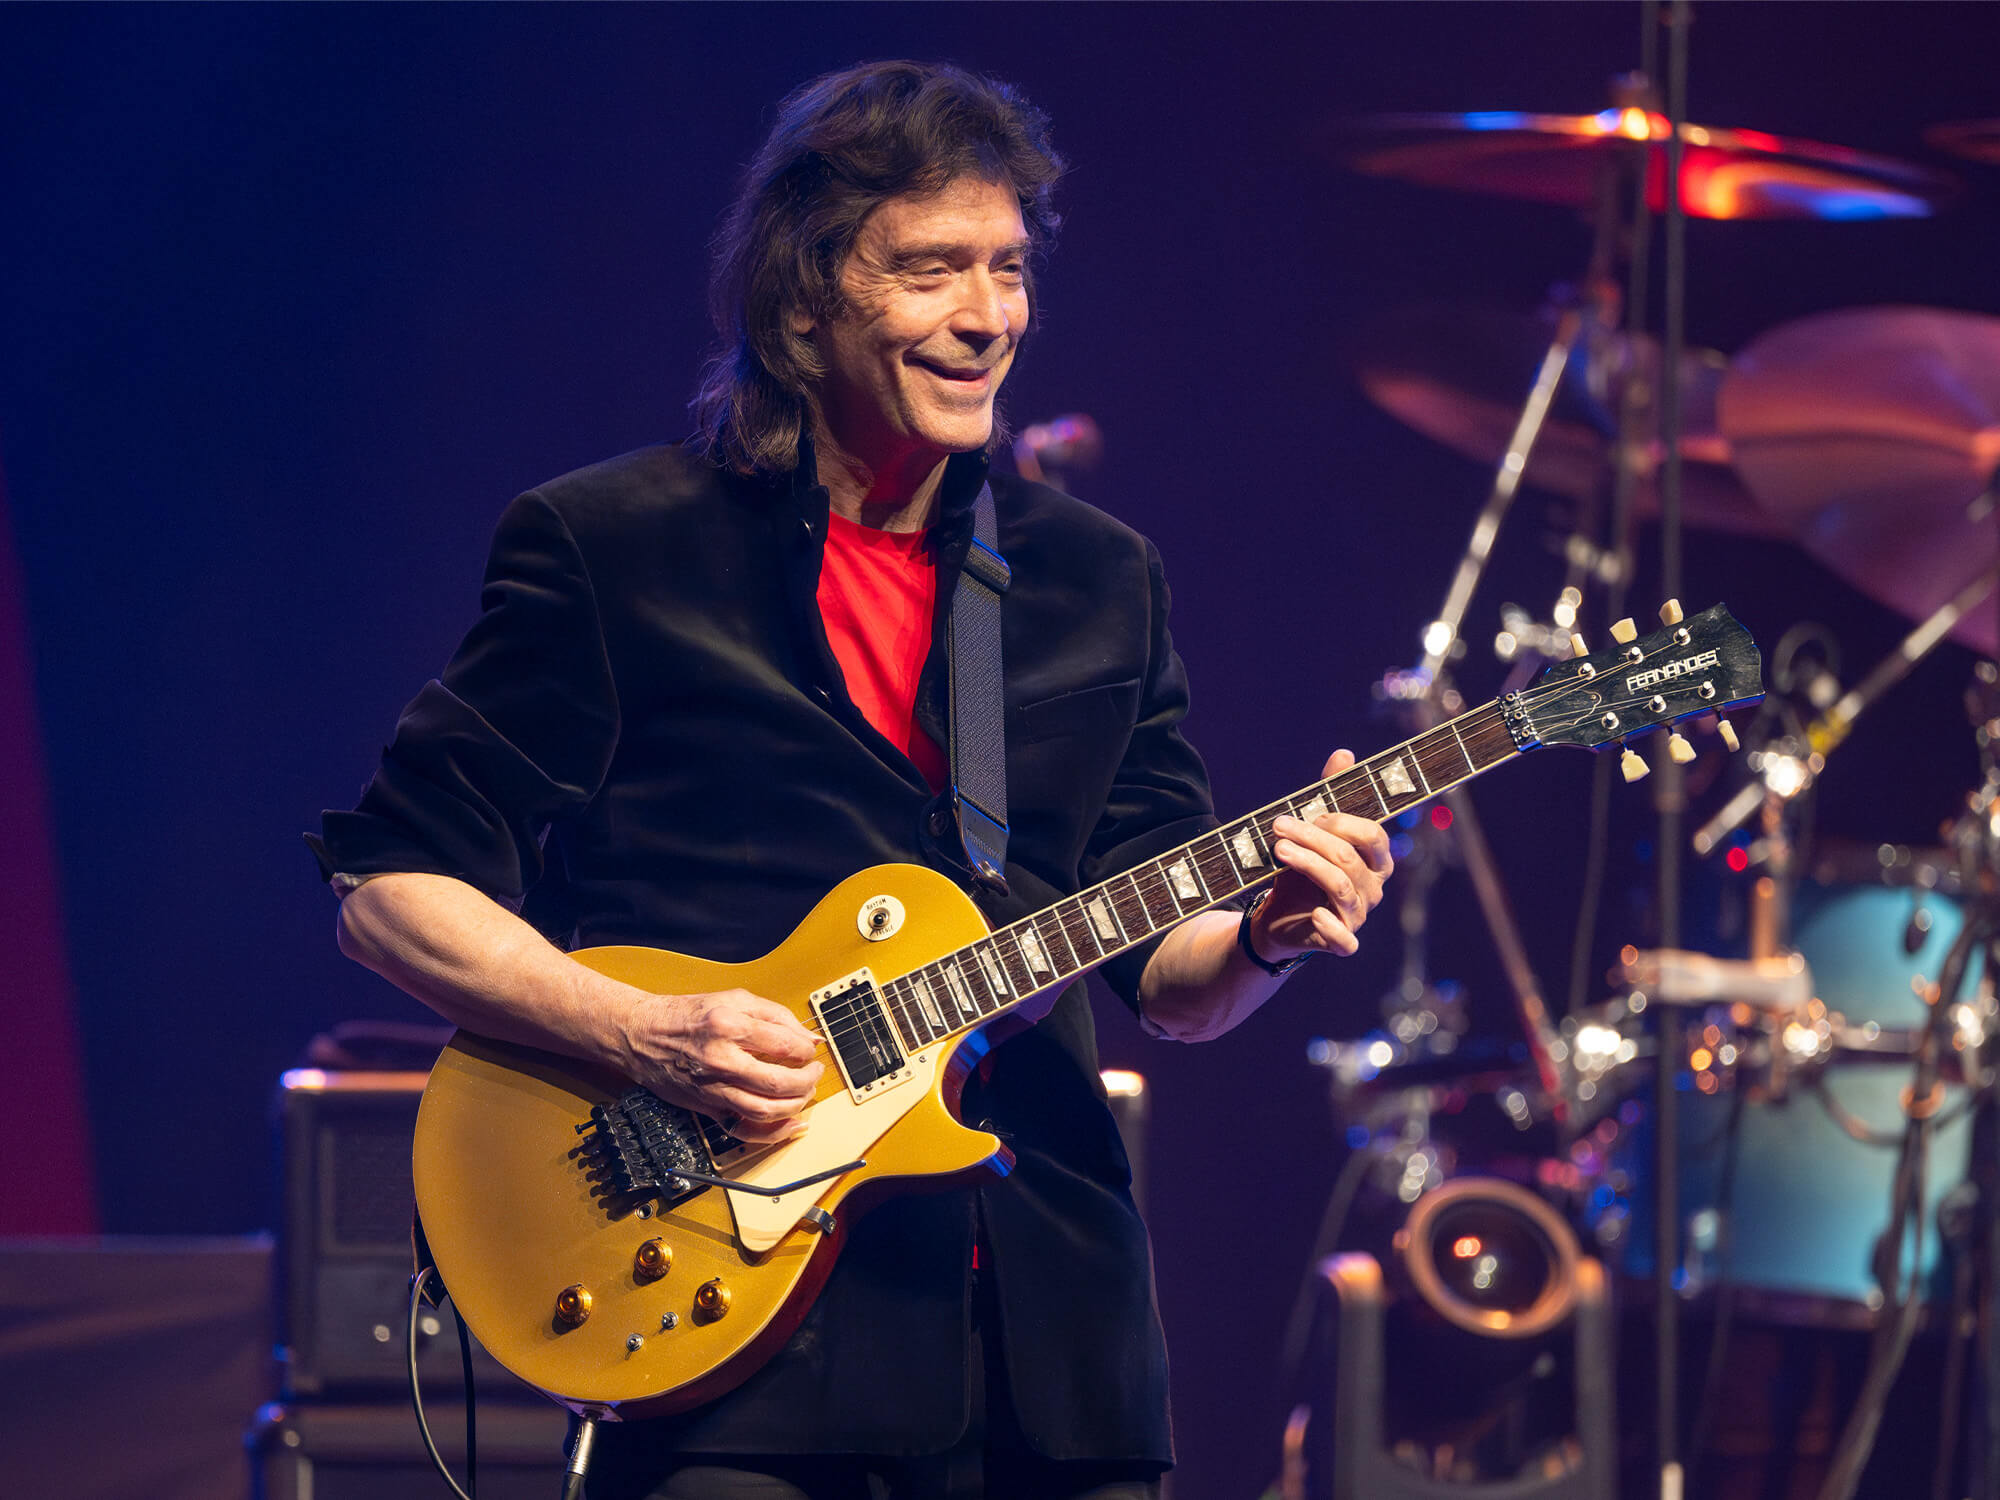 Steve Hackett on stage, pictured smiling as he plays guitar